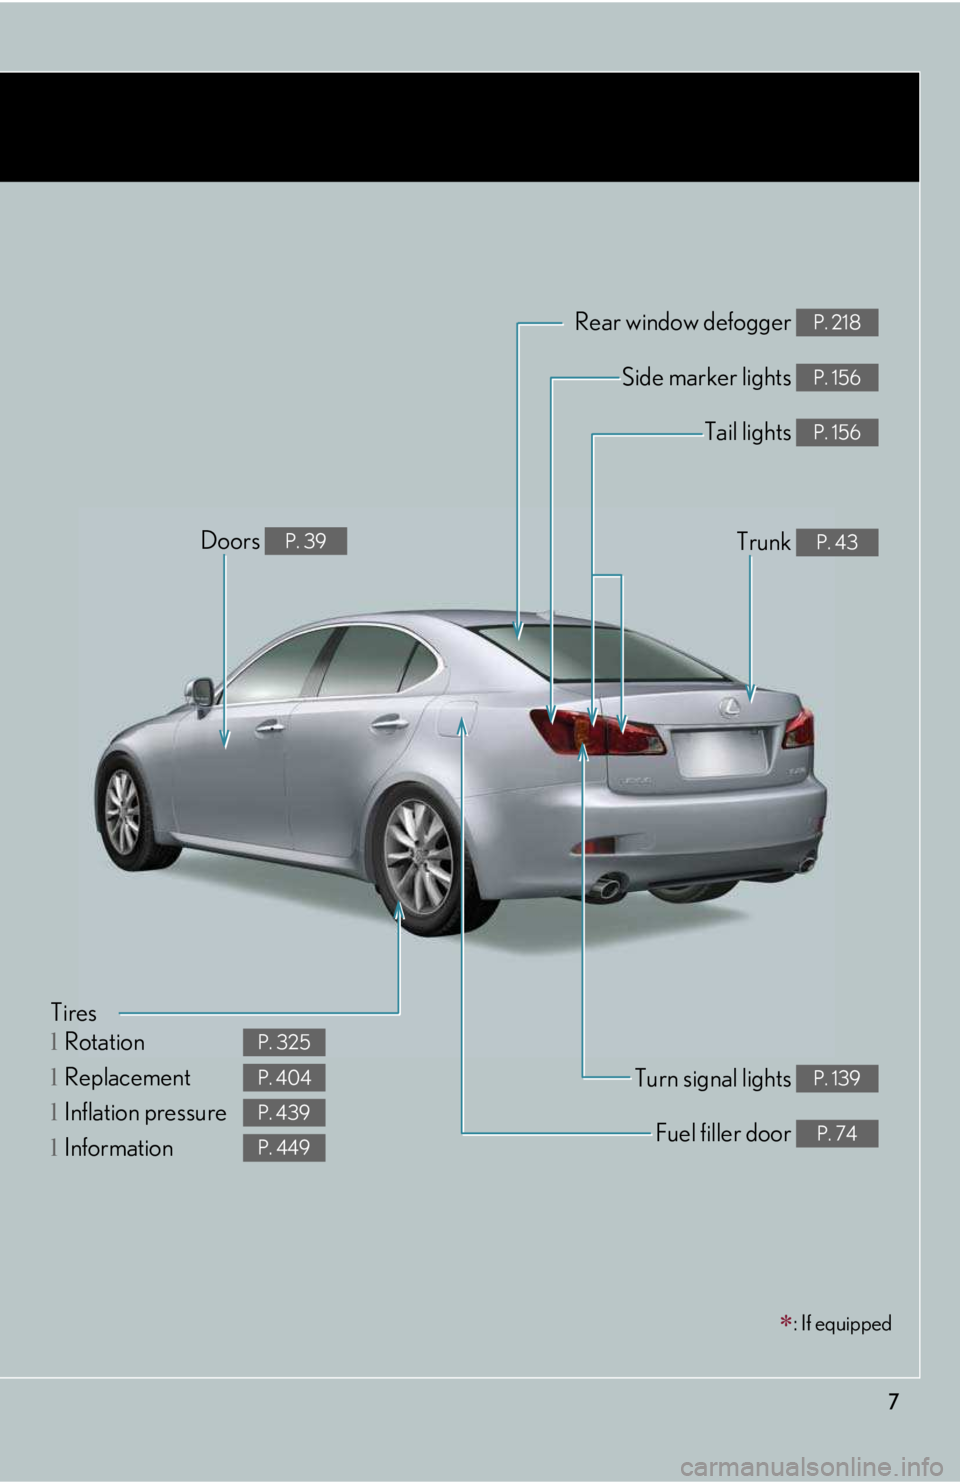 LEXUS IS250 2016  Owners Manual 7
�∗: If equipped
Tires
lRotation
lReplacement
lInflation pressure
lInformation
P. 325
P. 404
P. 439
P. 449
Tail lights P. 156
Side marker lights P. 156
Trunk P. 43
Rear window defogger P. 218
Doors